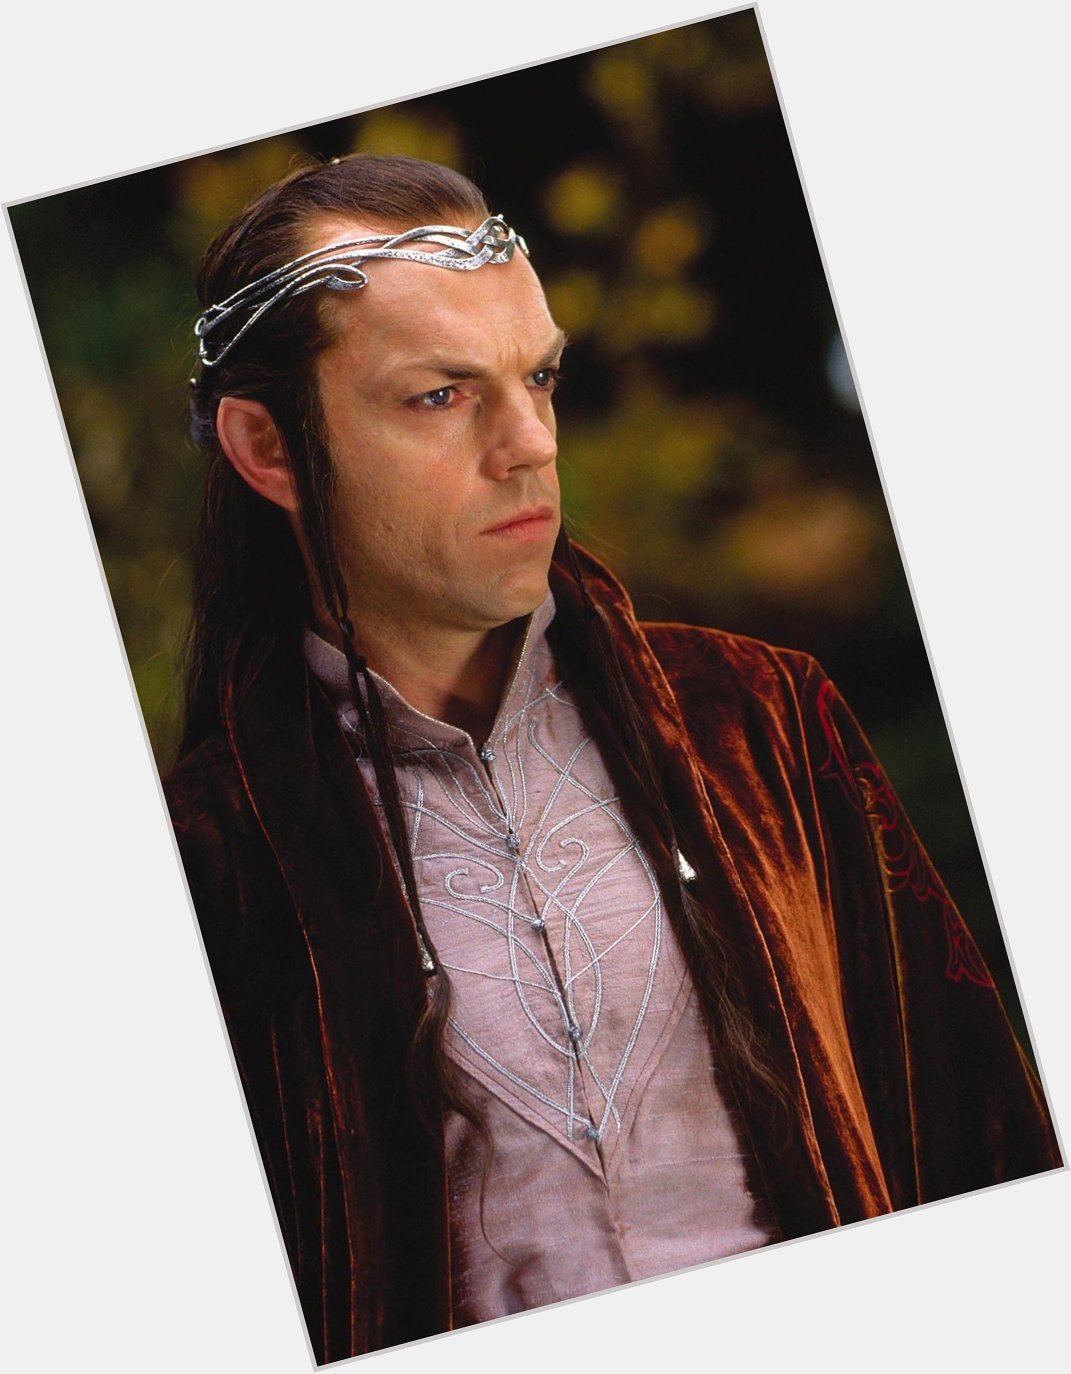 Happy Birthday to one of my biggest idols Hugo Weaving.
I hope he has a great day. He deserves it. 